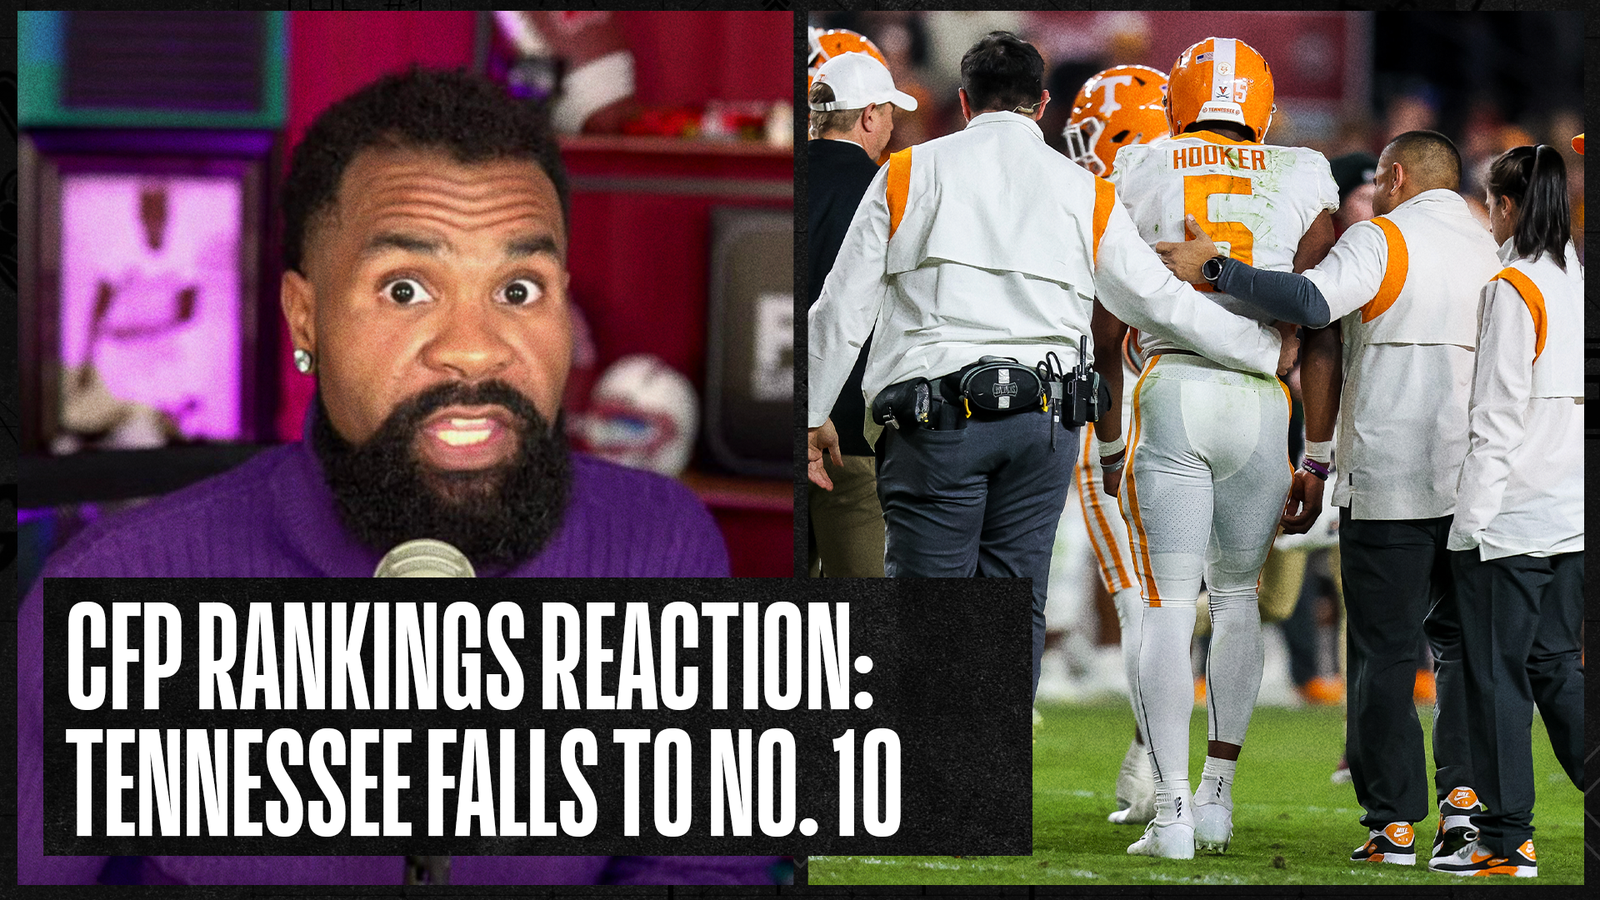 CFP Rankings reaction: Tennessee falls to No. 10